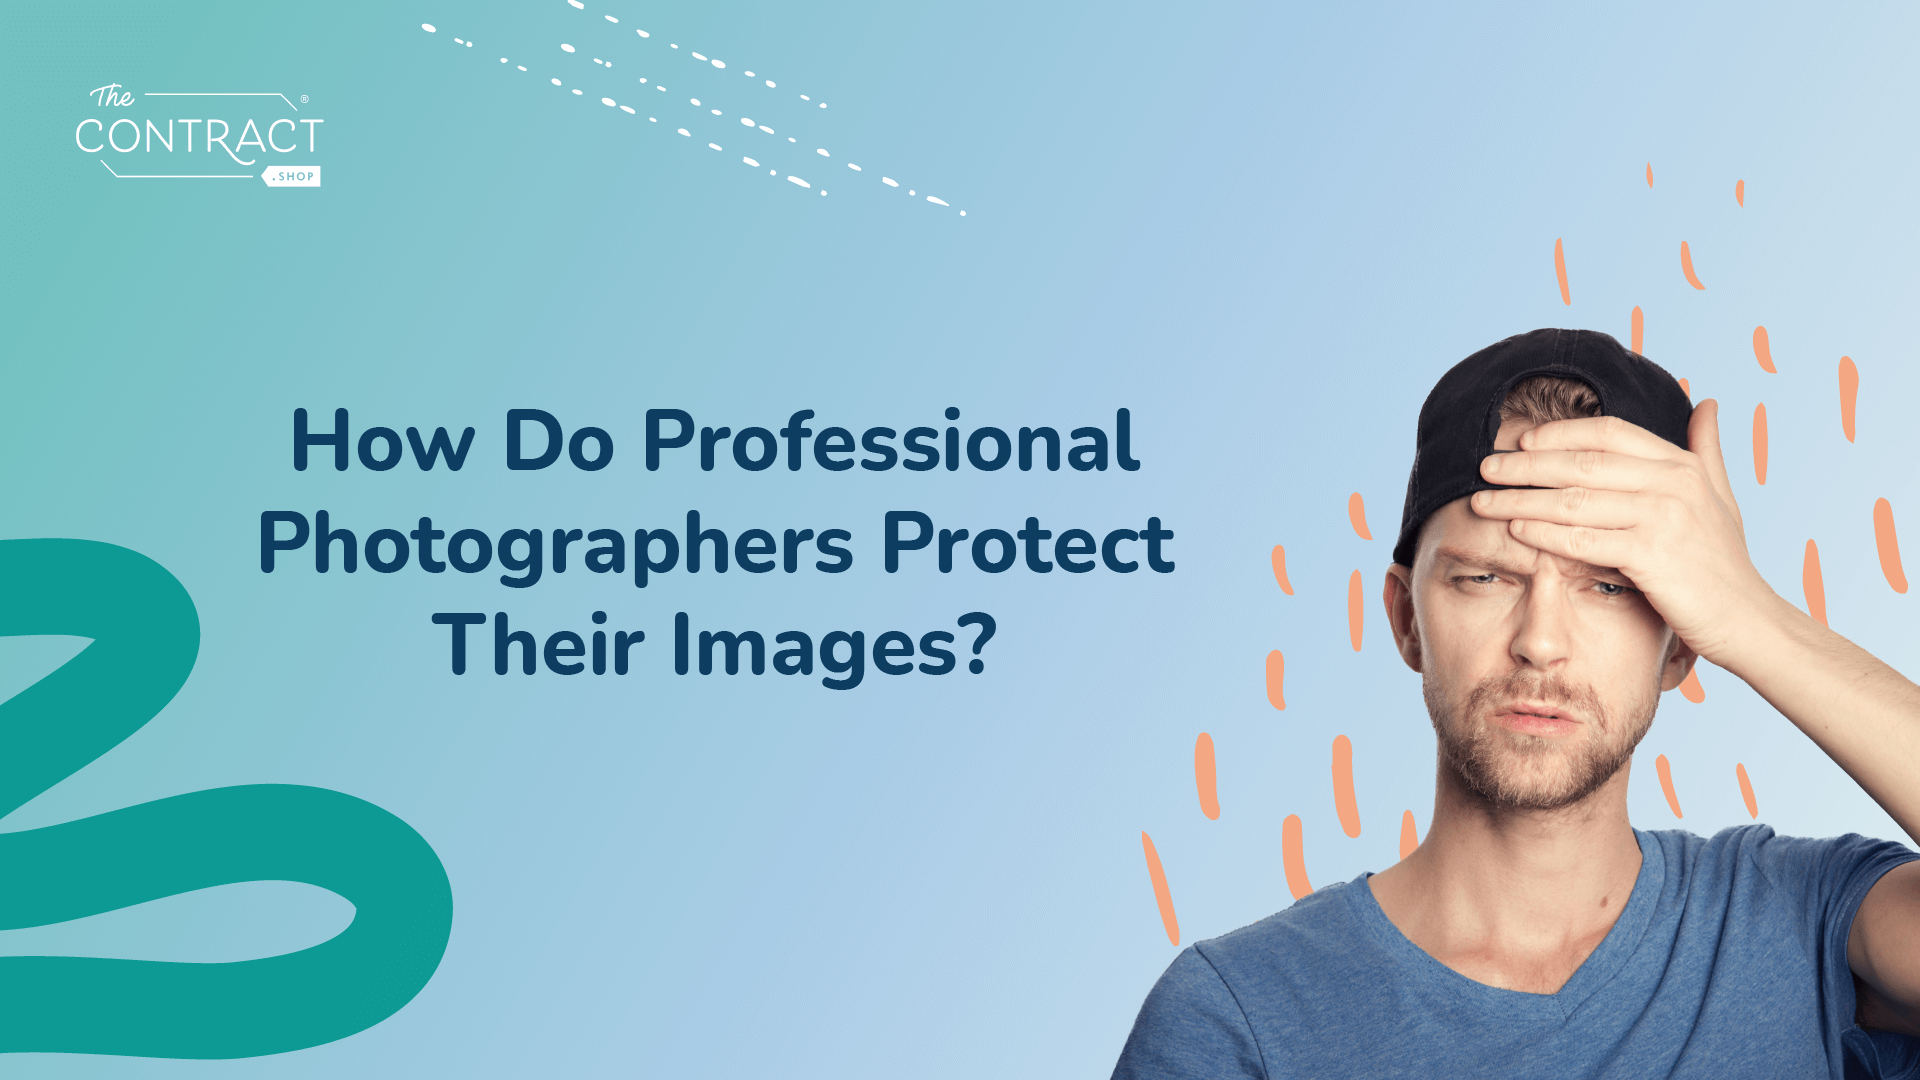 How Do Professional Photographers Protect Their Images?